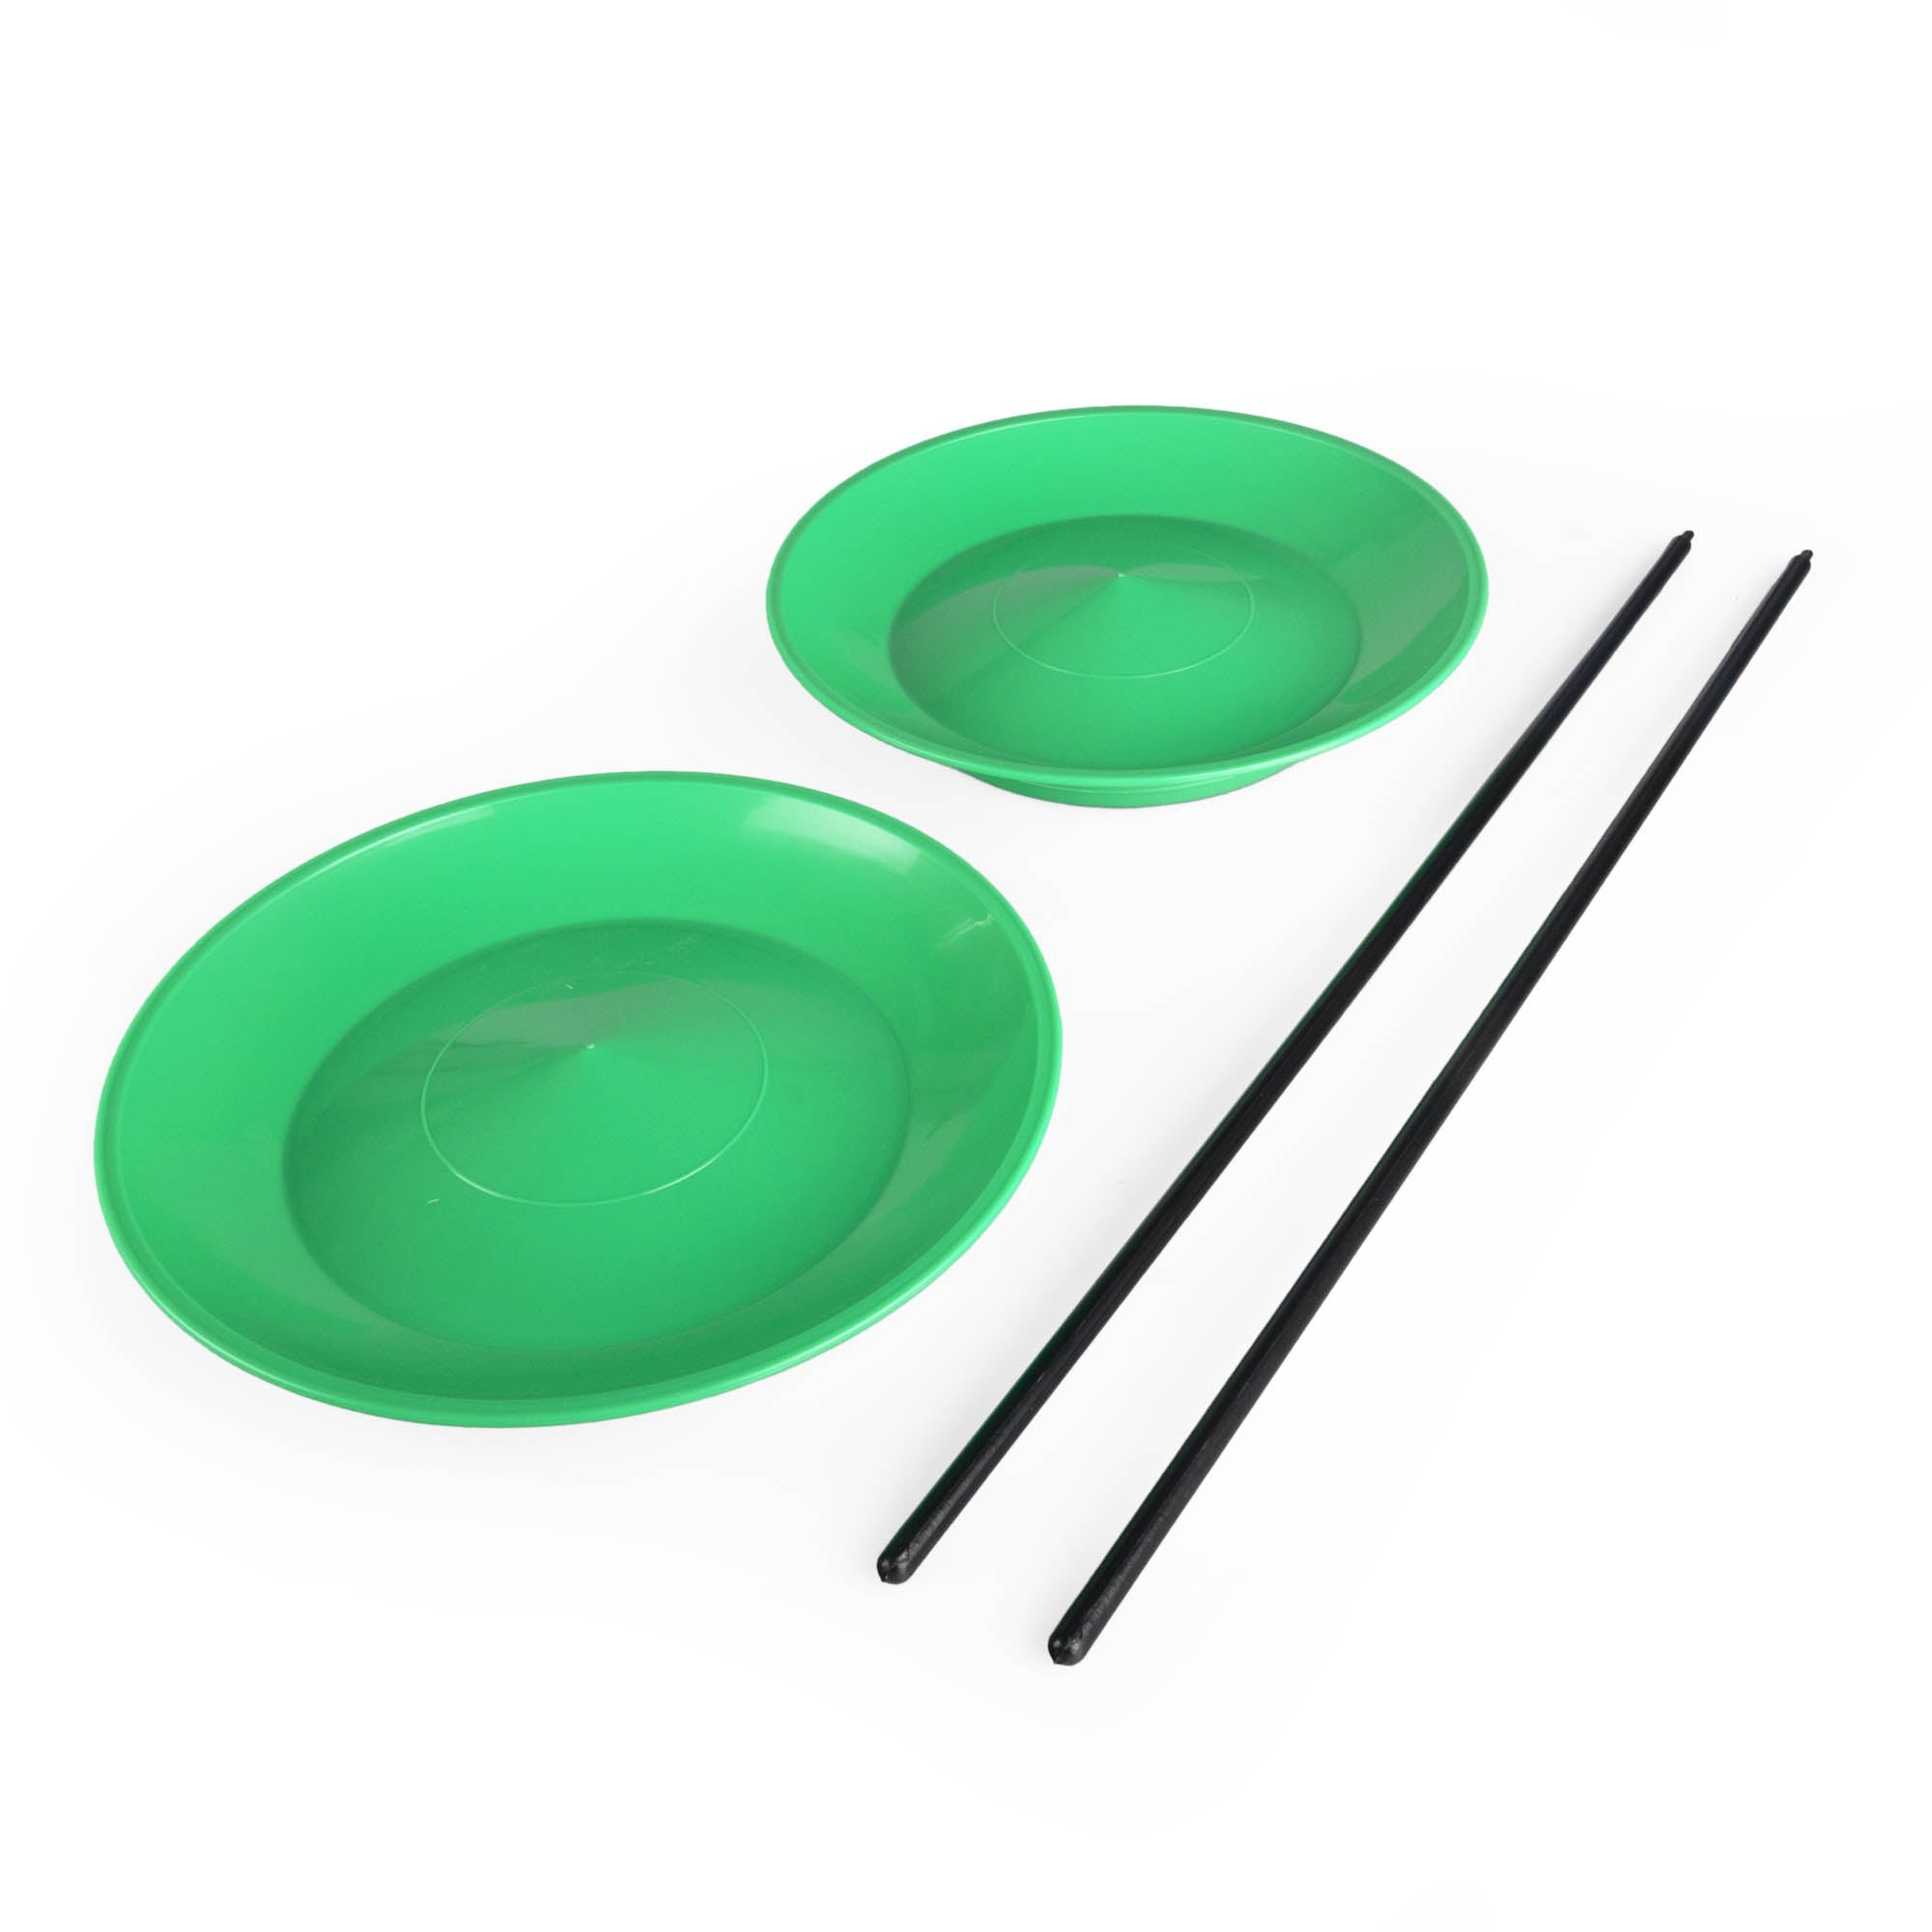 Status spinning plates 2 x green with 2 sticks at a slight angle